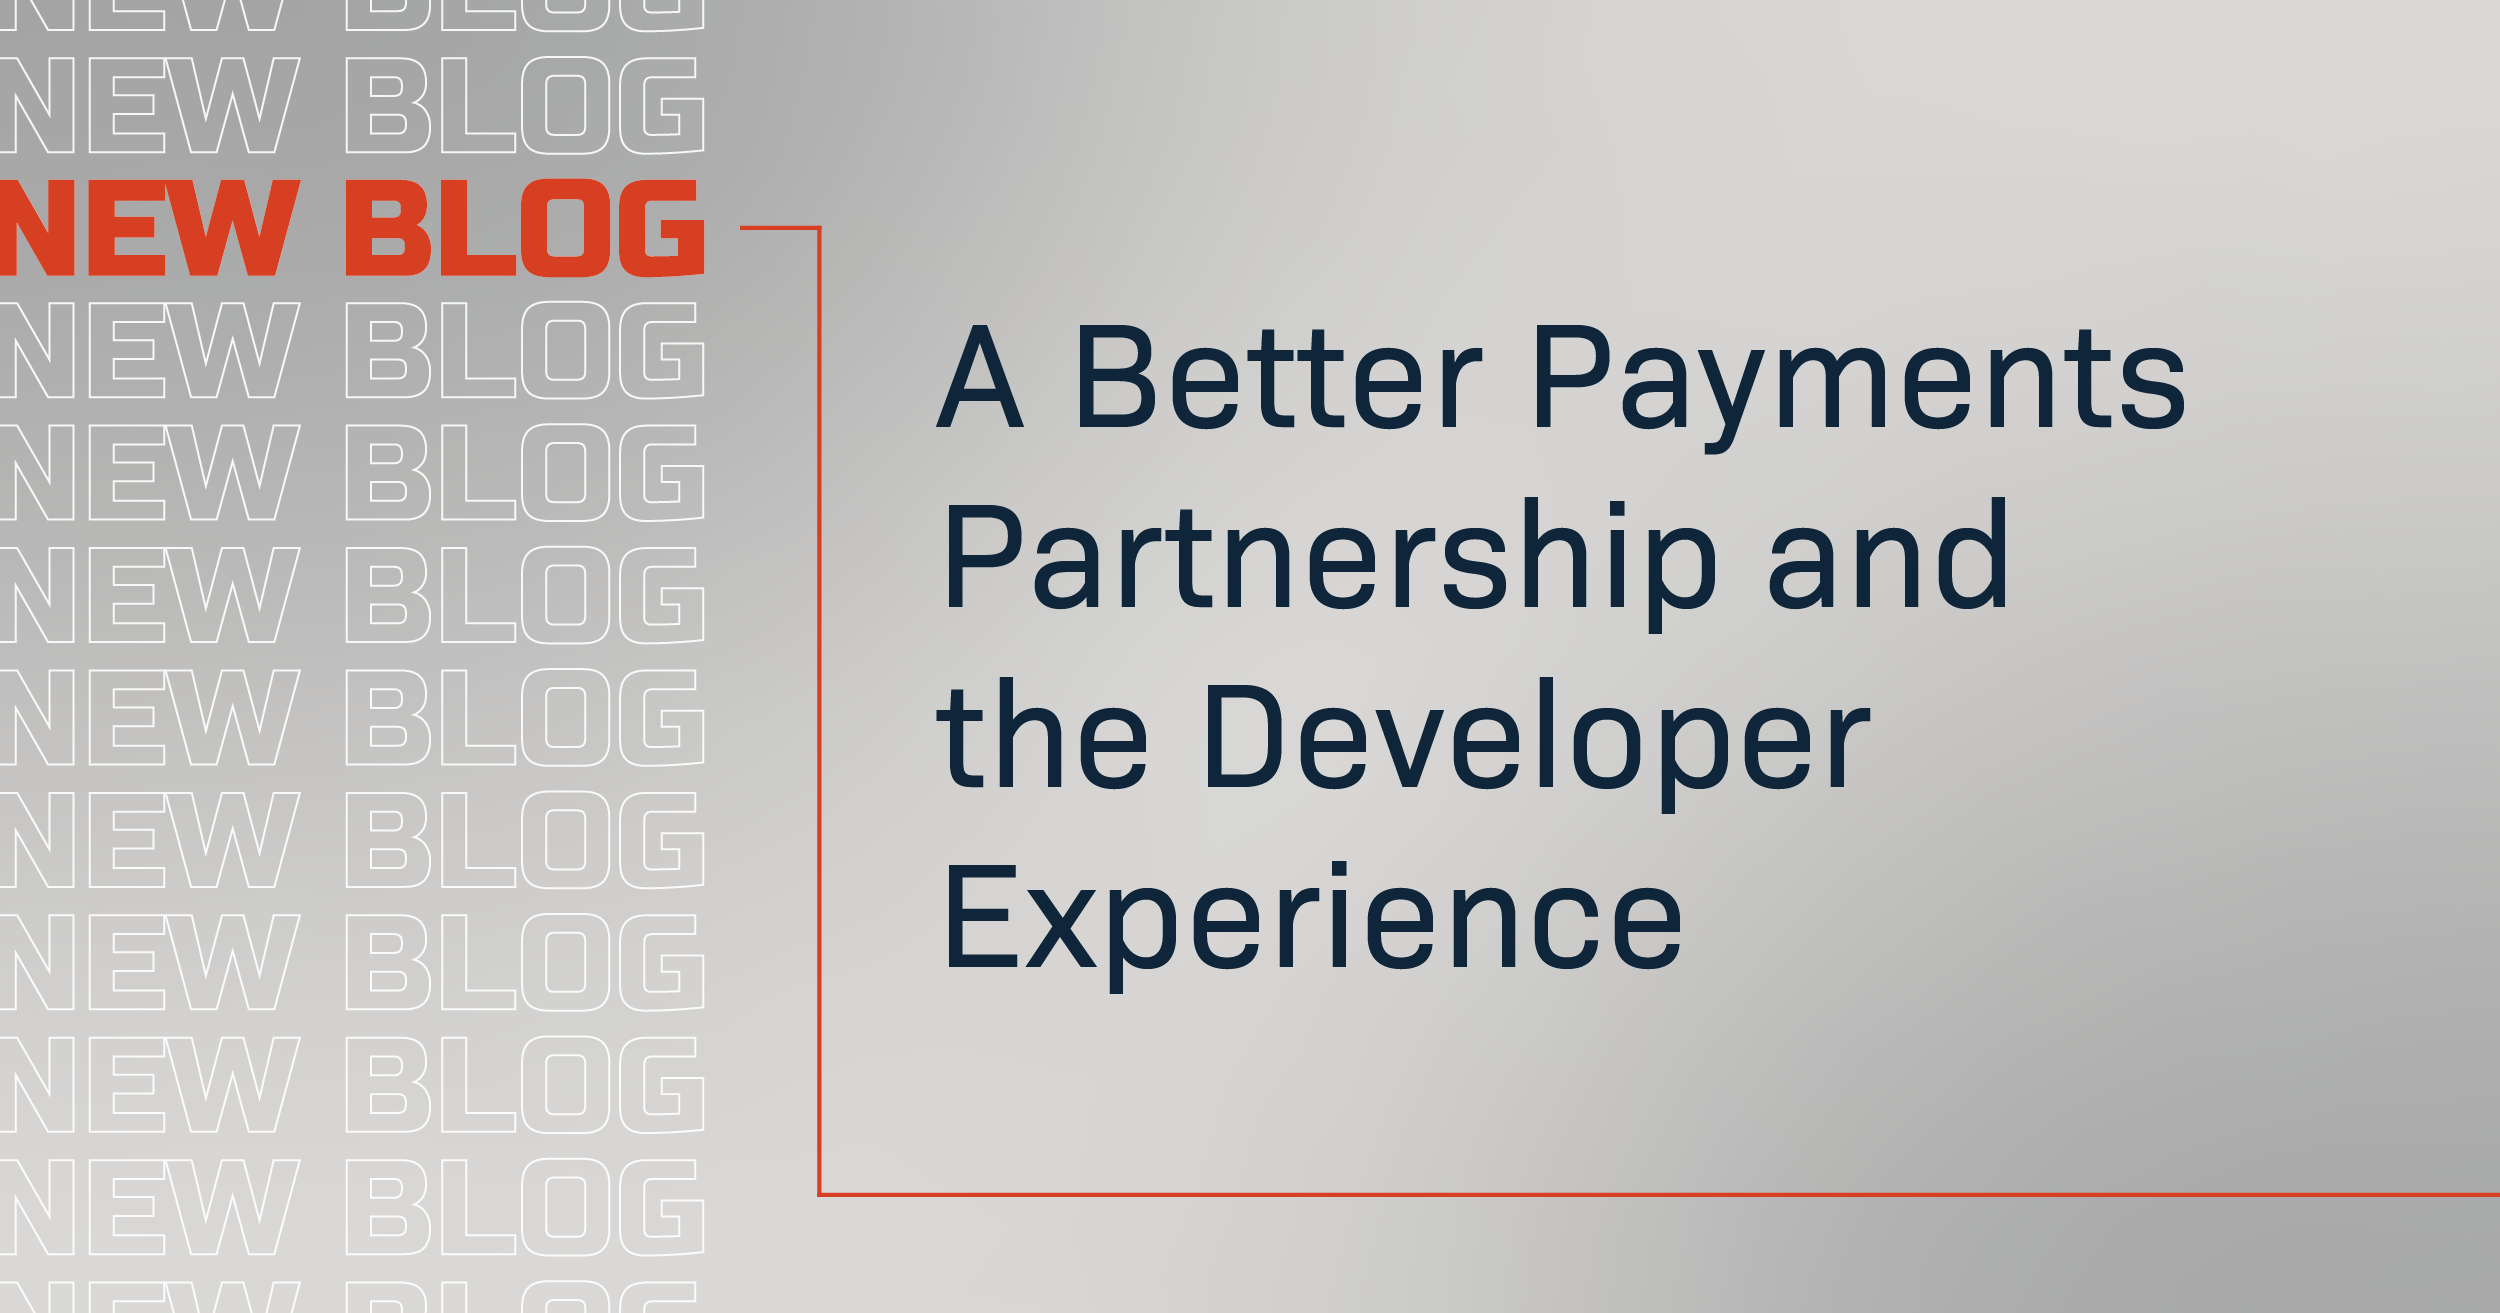 A Better Payments Partnership and the Developer Experience - Featured Image